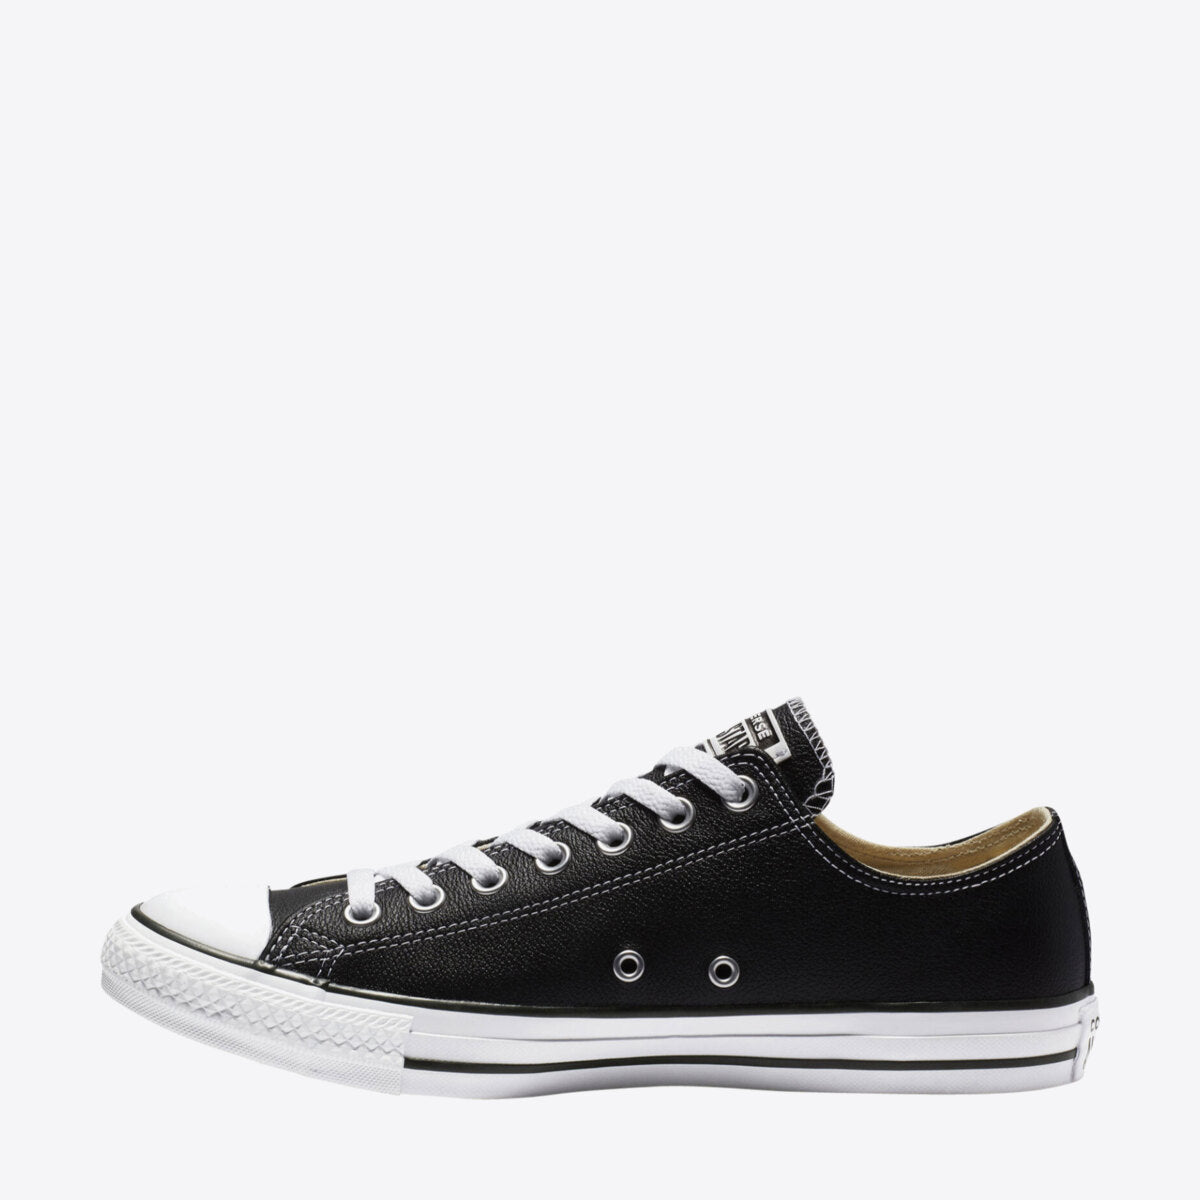 CONVERSE Chuck Taylor All Star Leather Low Black - Image 5